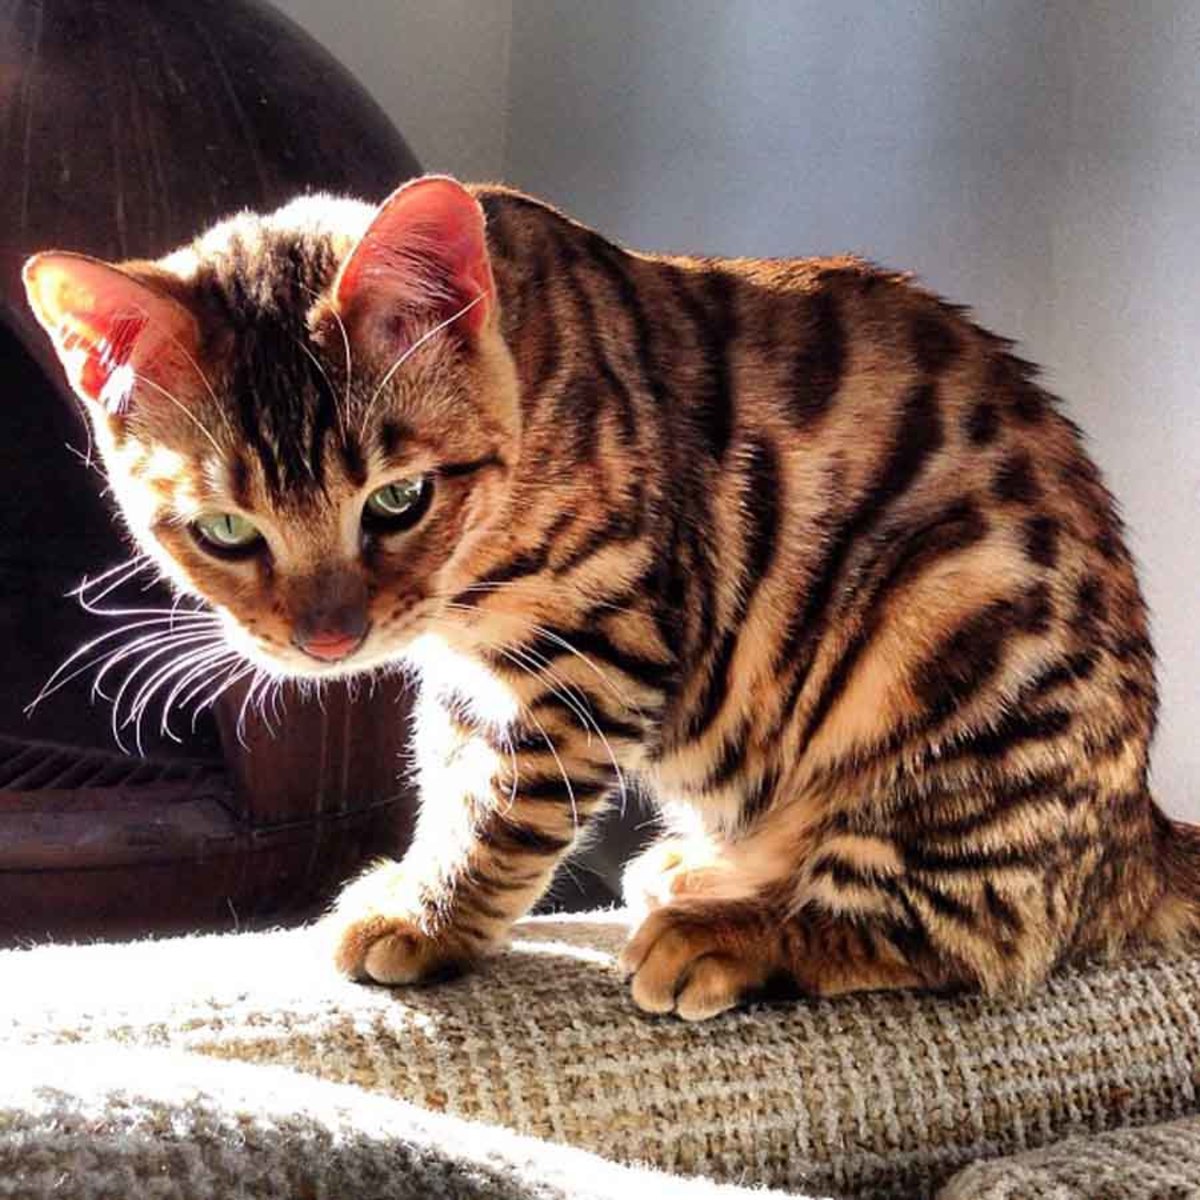 10 Cats That Look Like Tigers, Leopards, and Cheetahs PetHelpful